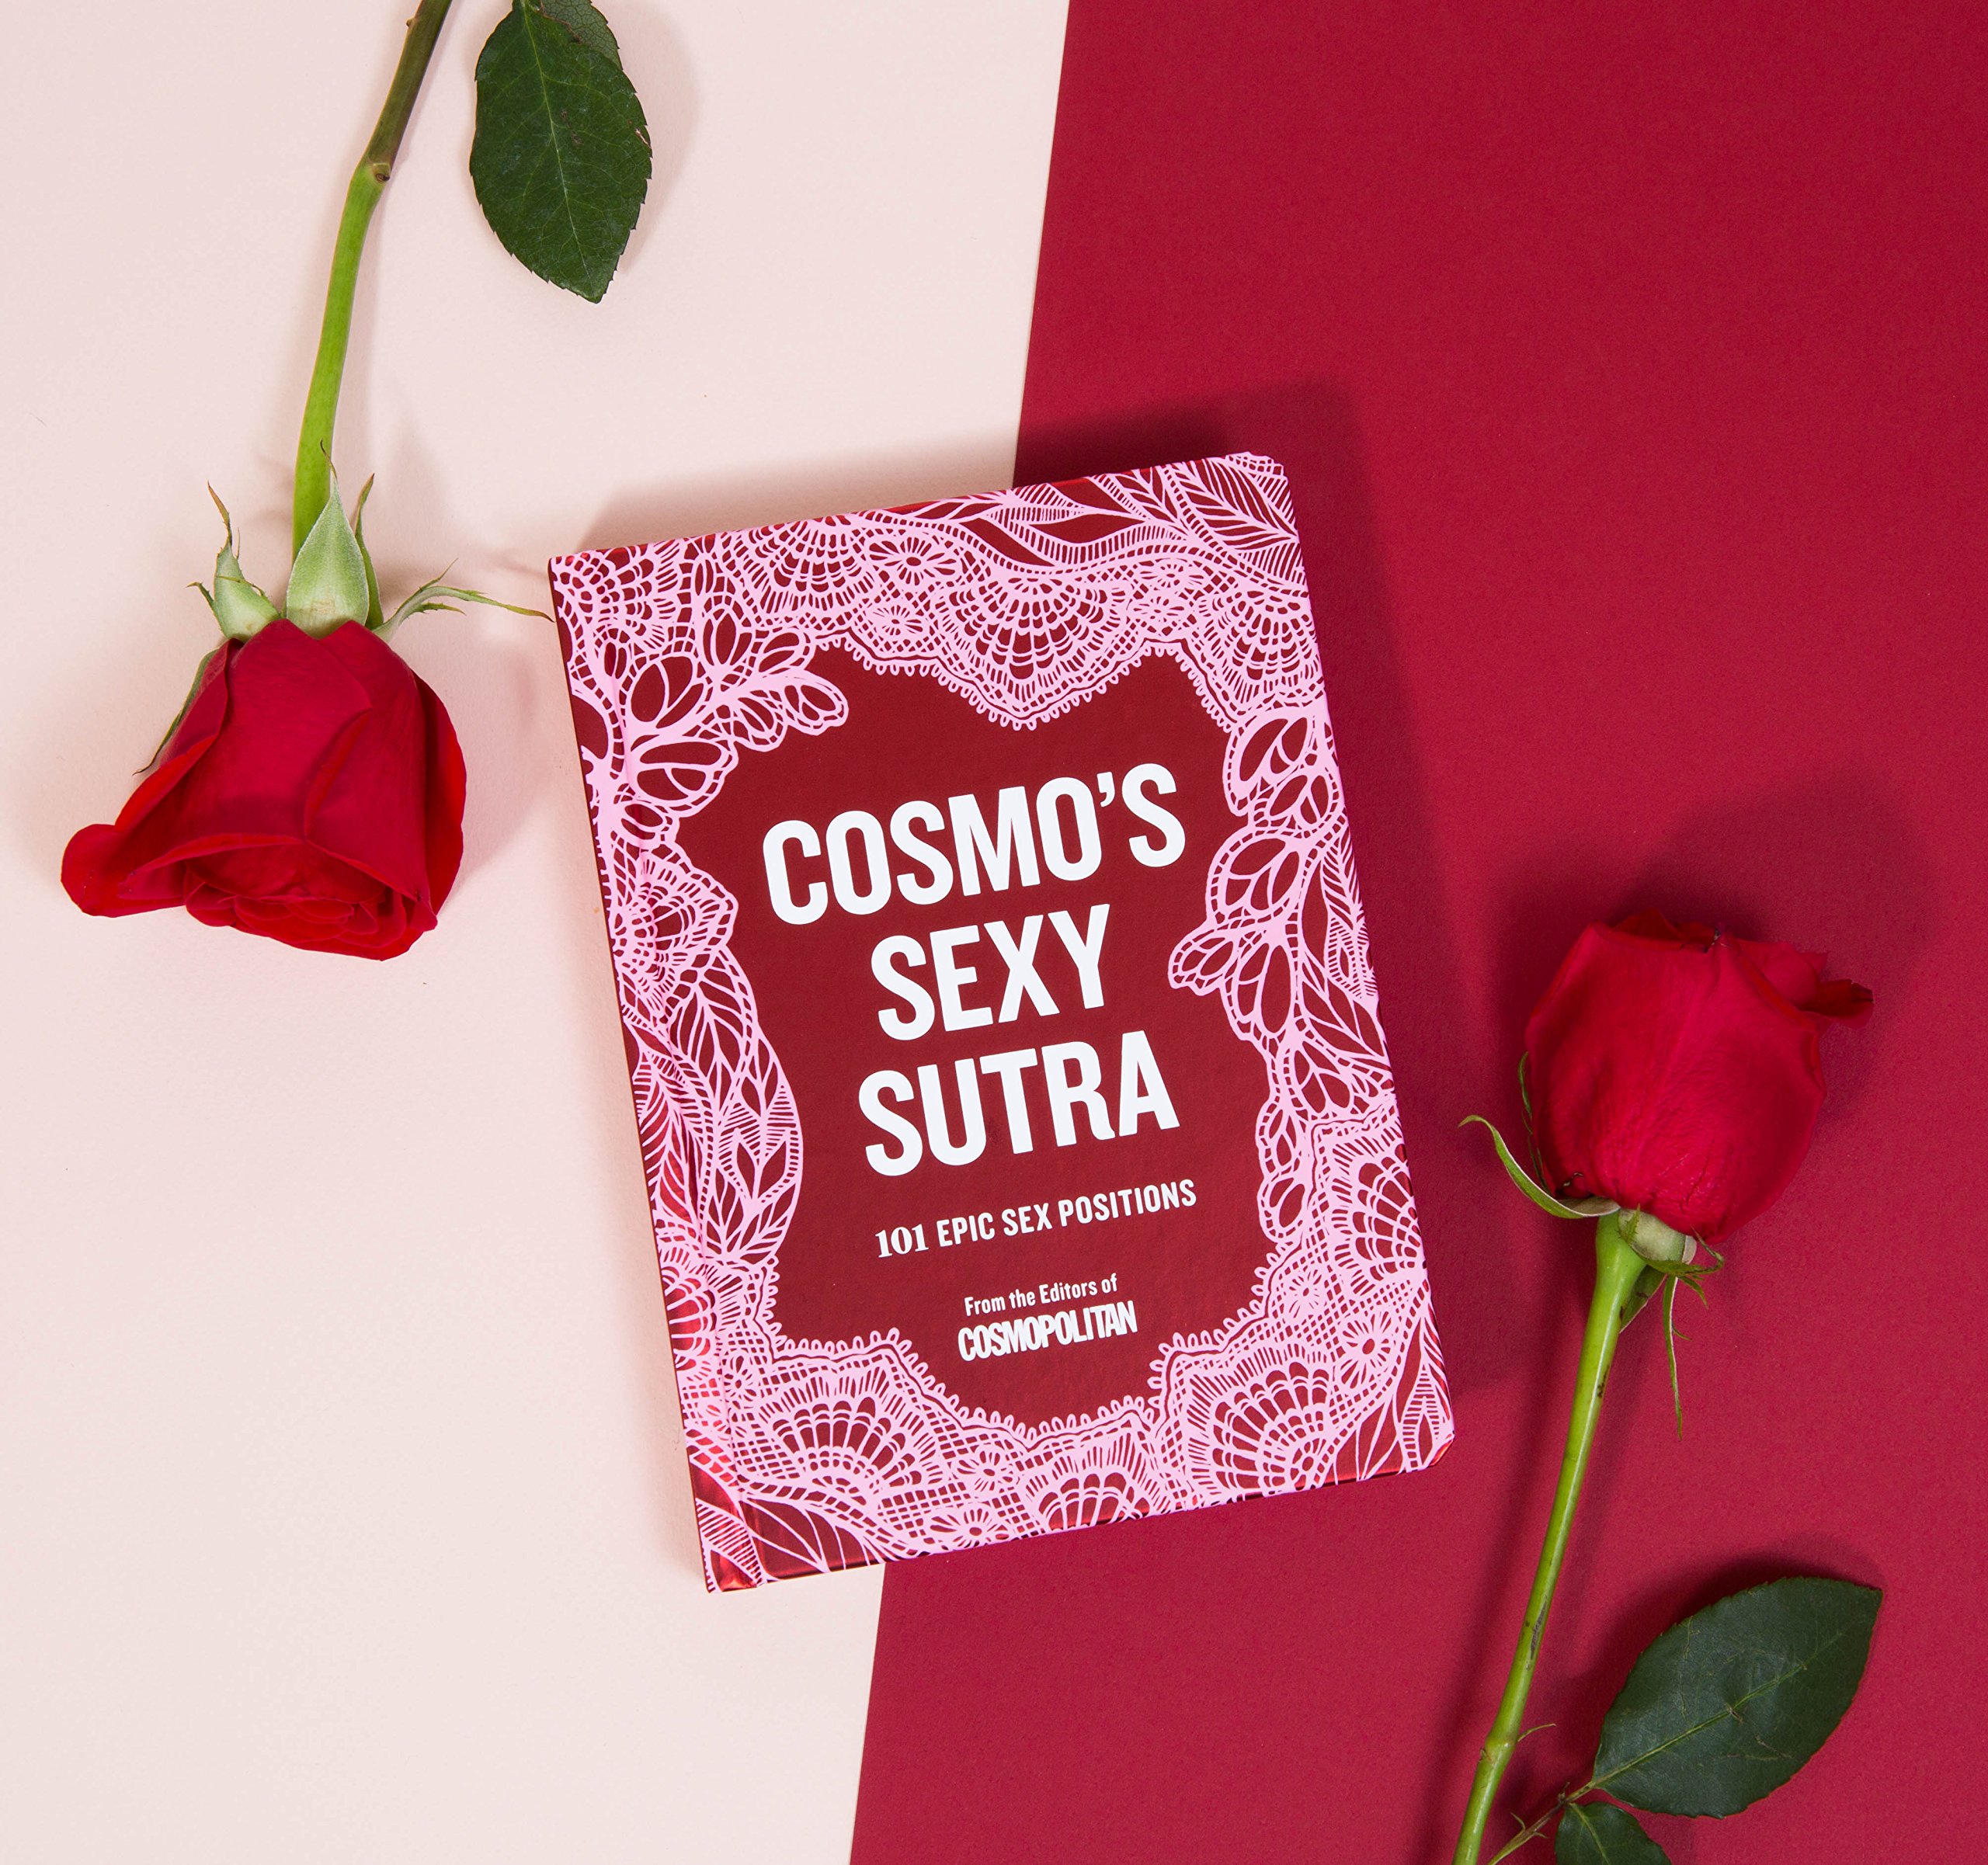 Cosmo's Sexy Sutra: 101 Epic Sex Positions (Gifts for Couples, Sex Books, Bachelorette Party Gifts)